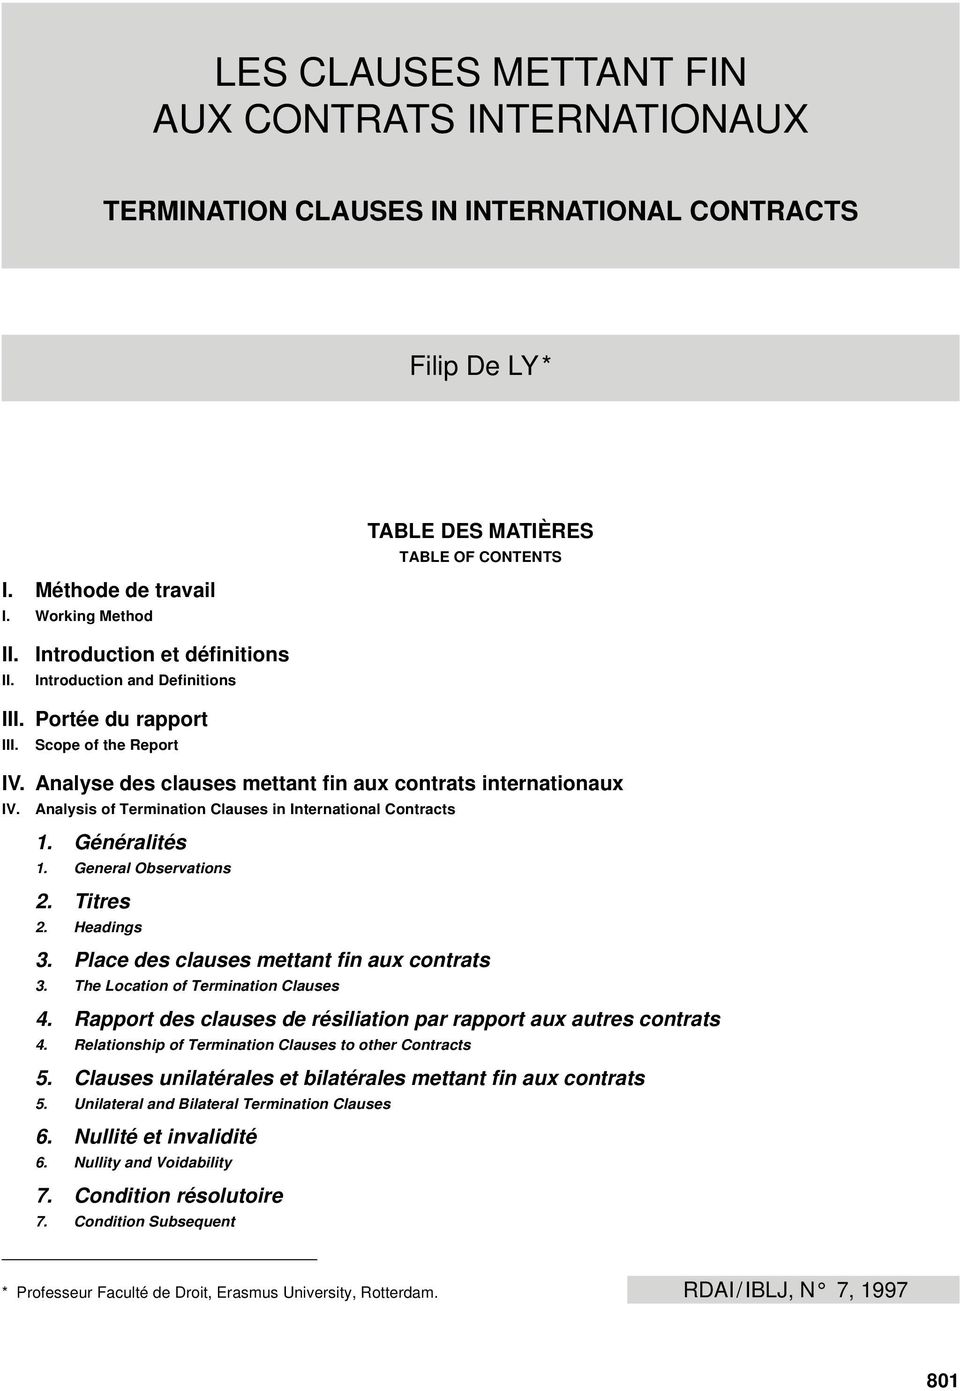 Analysis of Termination Clauses in International Contracts 1. Généralités 1. General Observations 2. Titres 2. Headings 3. Place des clauses mettant fin aux contrats 3.